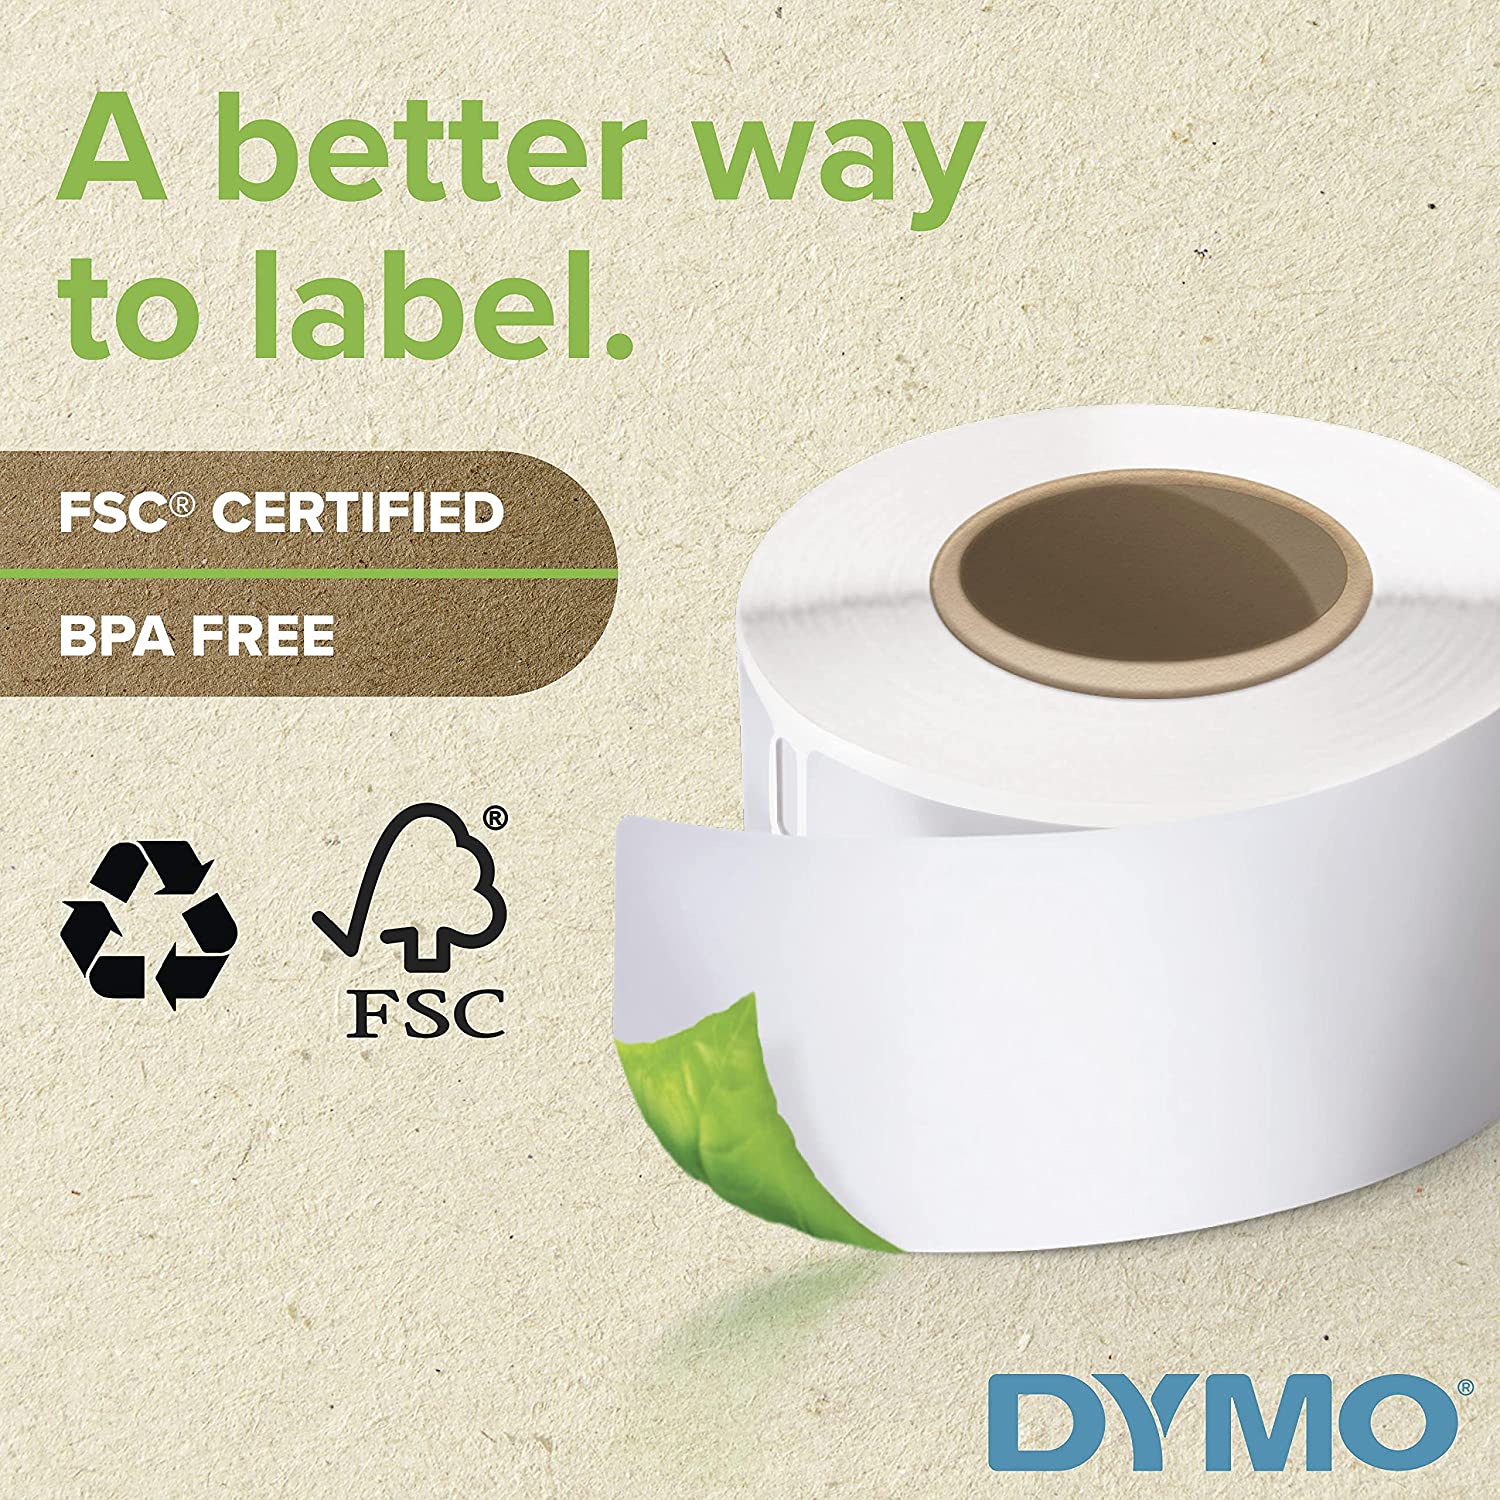 DYMO Labels for LabelWriter Printers (2-1/4&#34; x 4&#34;), 1 Roll of 250